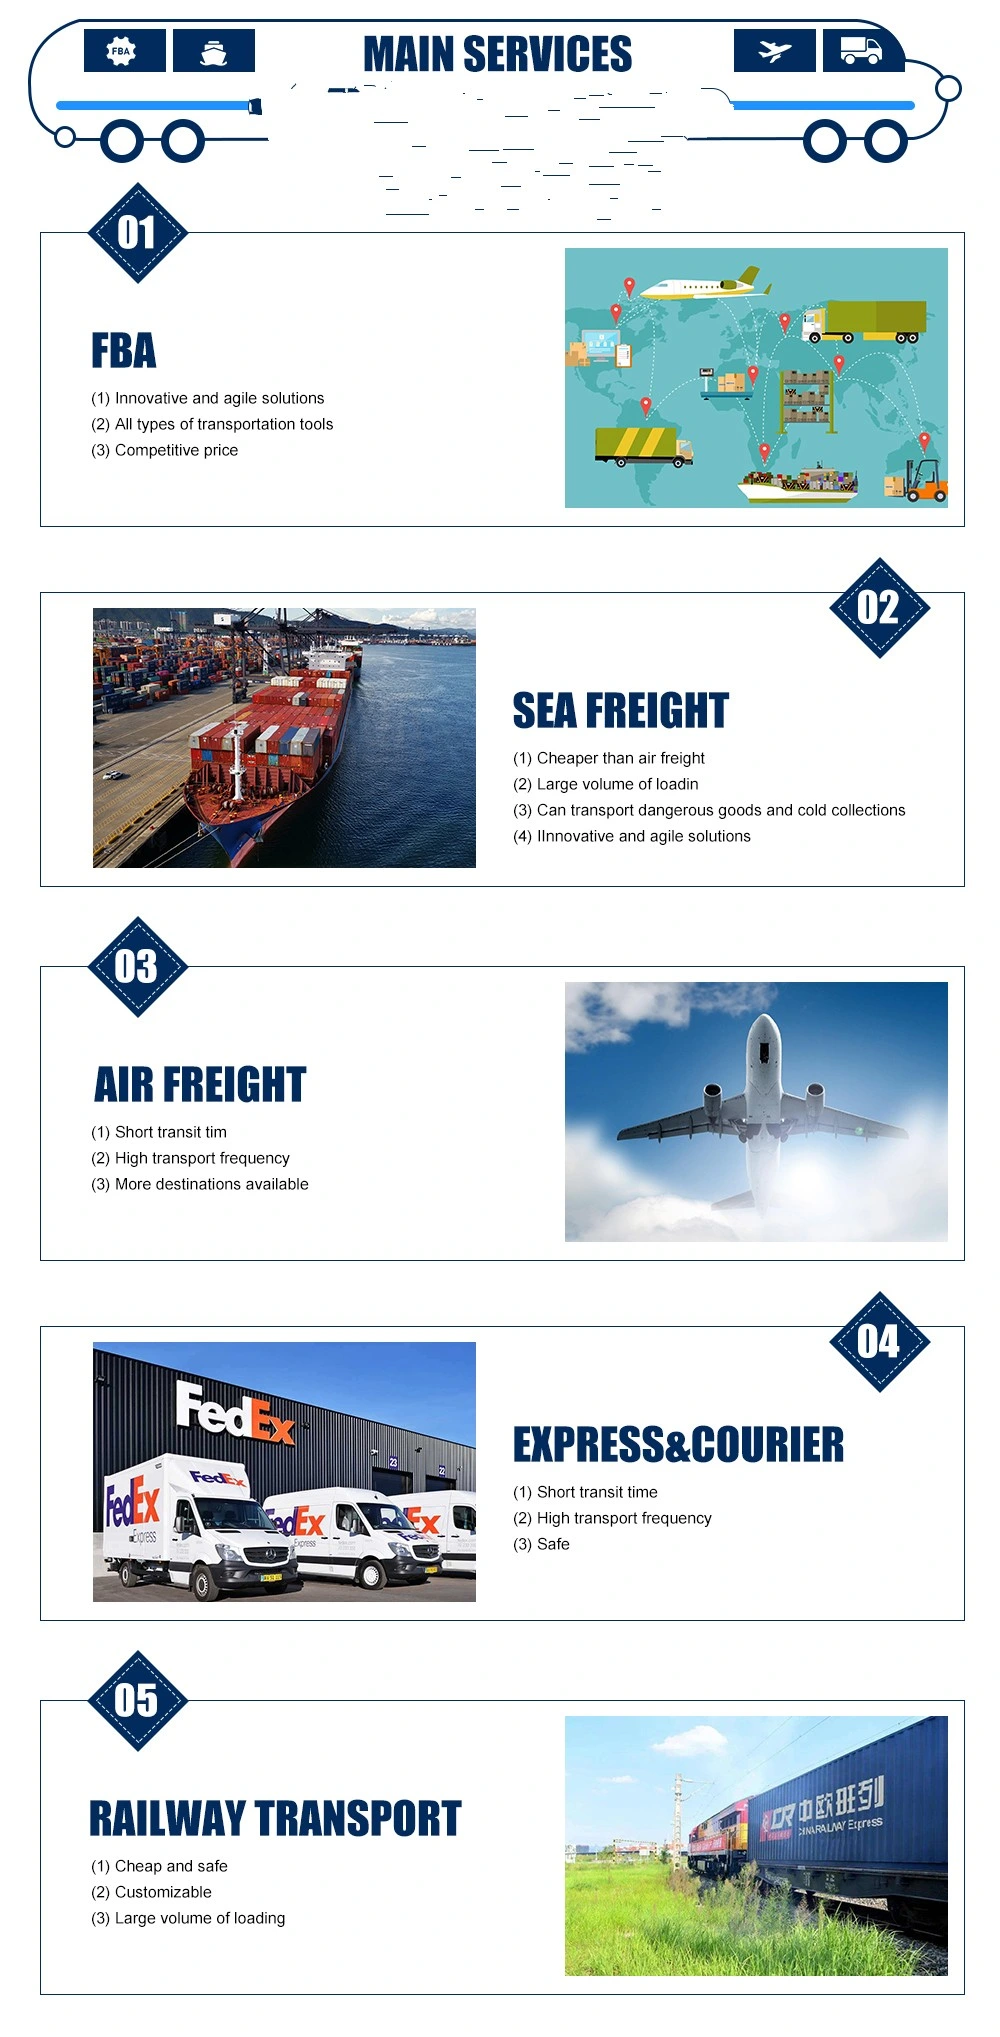 Raiyway Express, Warehousing, One-Piece Generation Delivery, Distribution and Transportation, Customs Clearance, Settlement From China to Europe /France